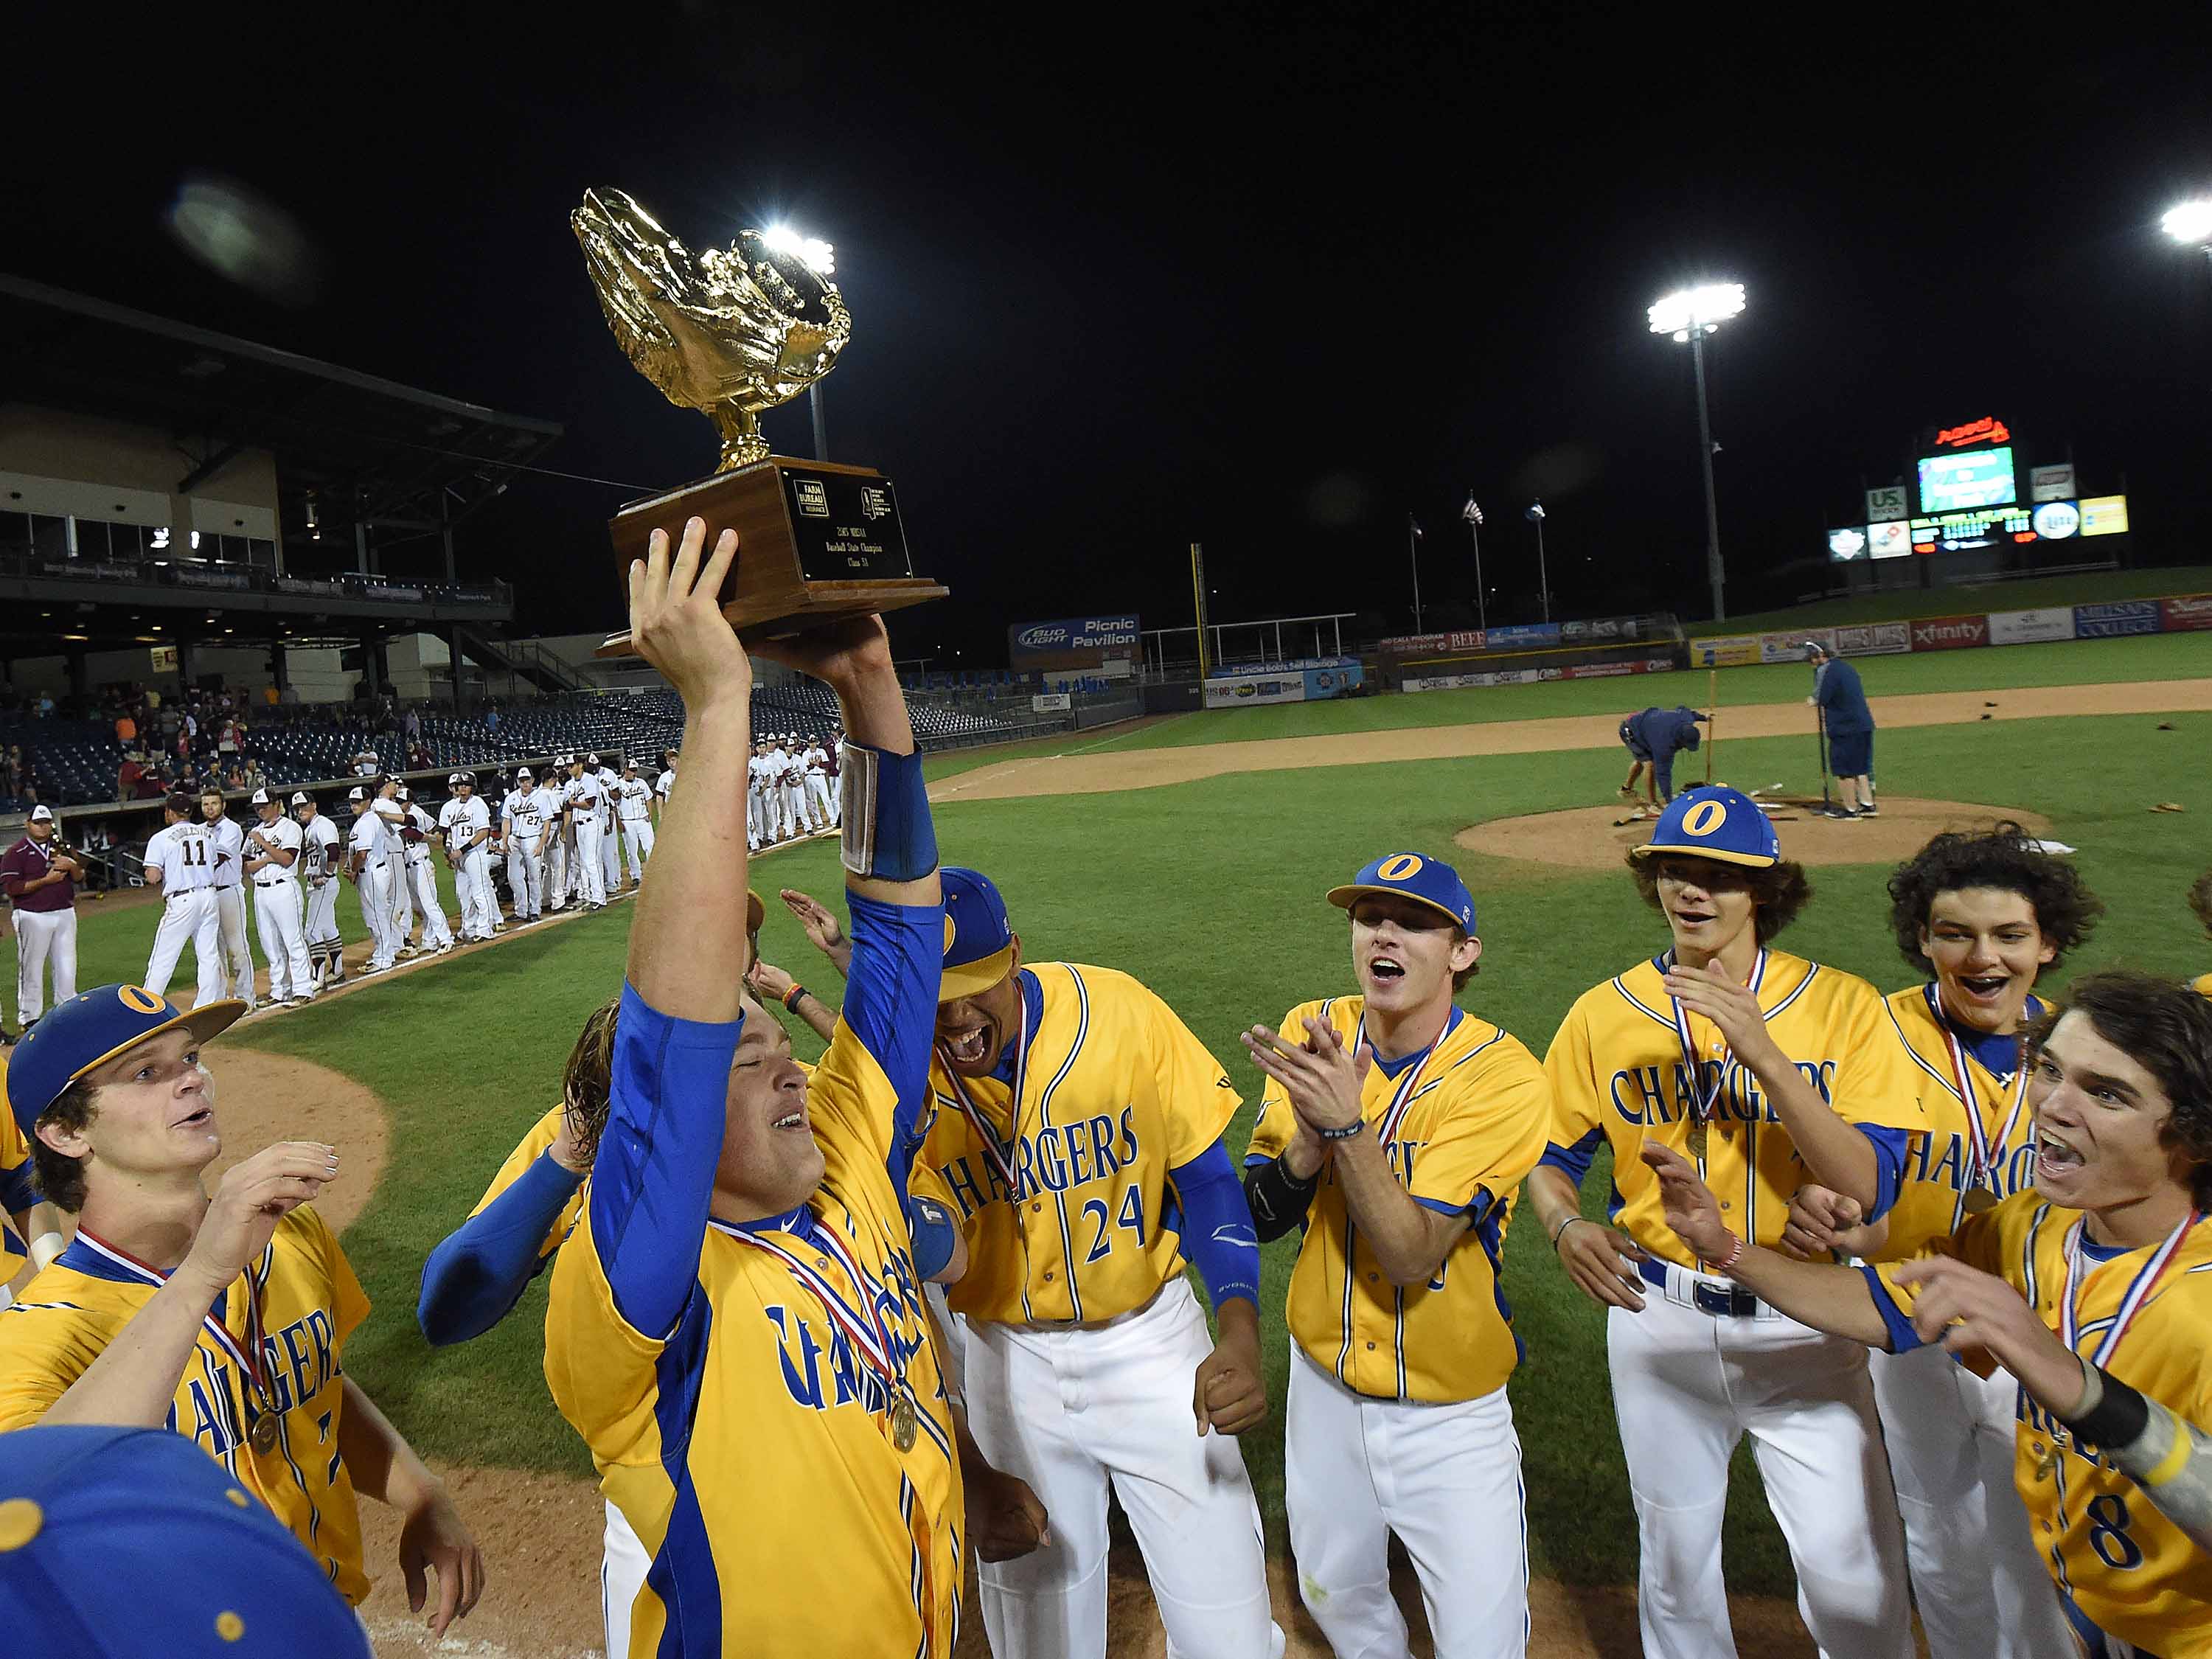 The Oxford Chargers celebrate with the Class 5A trophy after beating George County, 9-0, in Game 2 on Thursday in the MHSAA State Championship at Trustmark Park in Pearl.